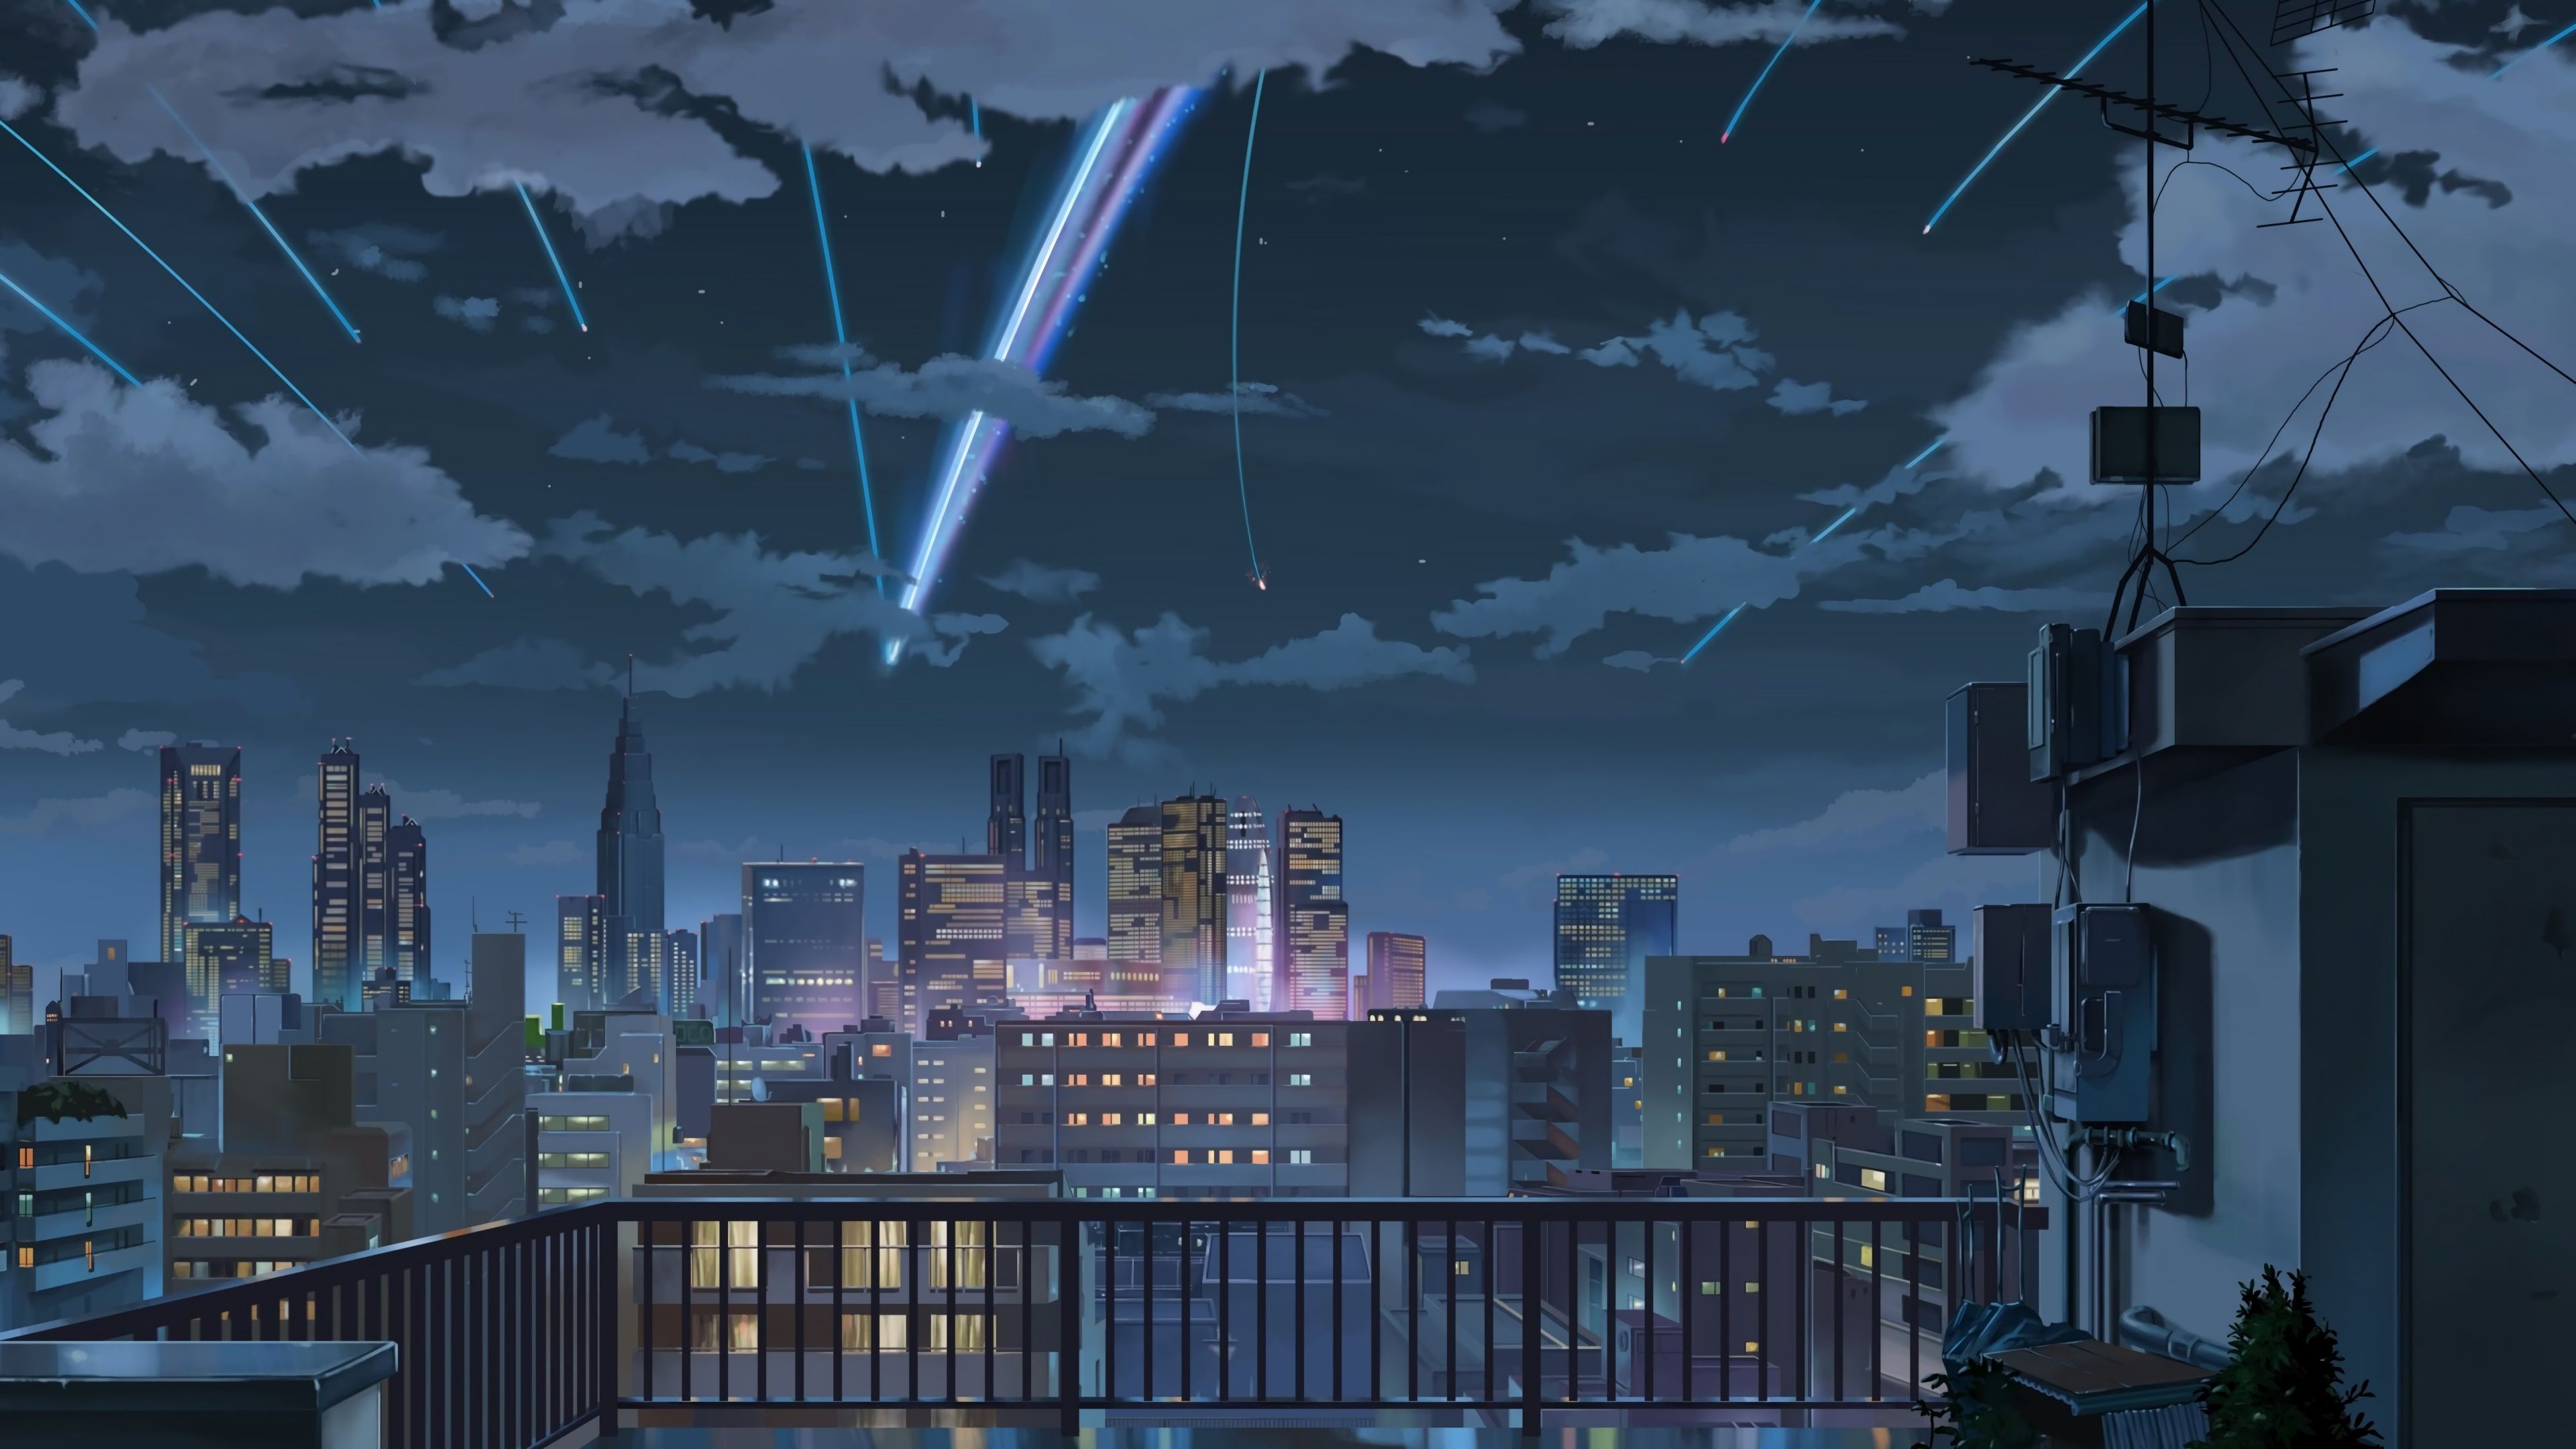 Your Name 4k PC Wallpapers - Wallpaper Cave